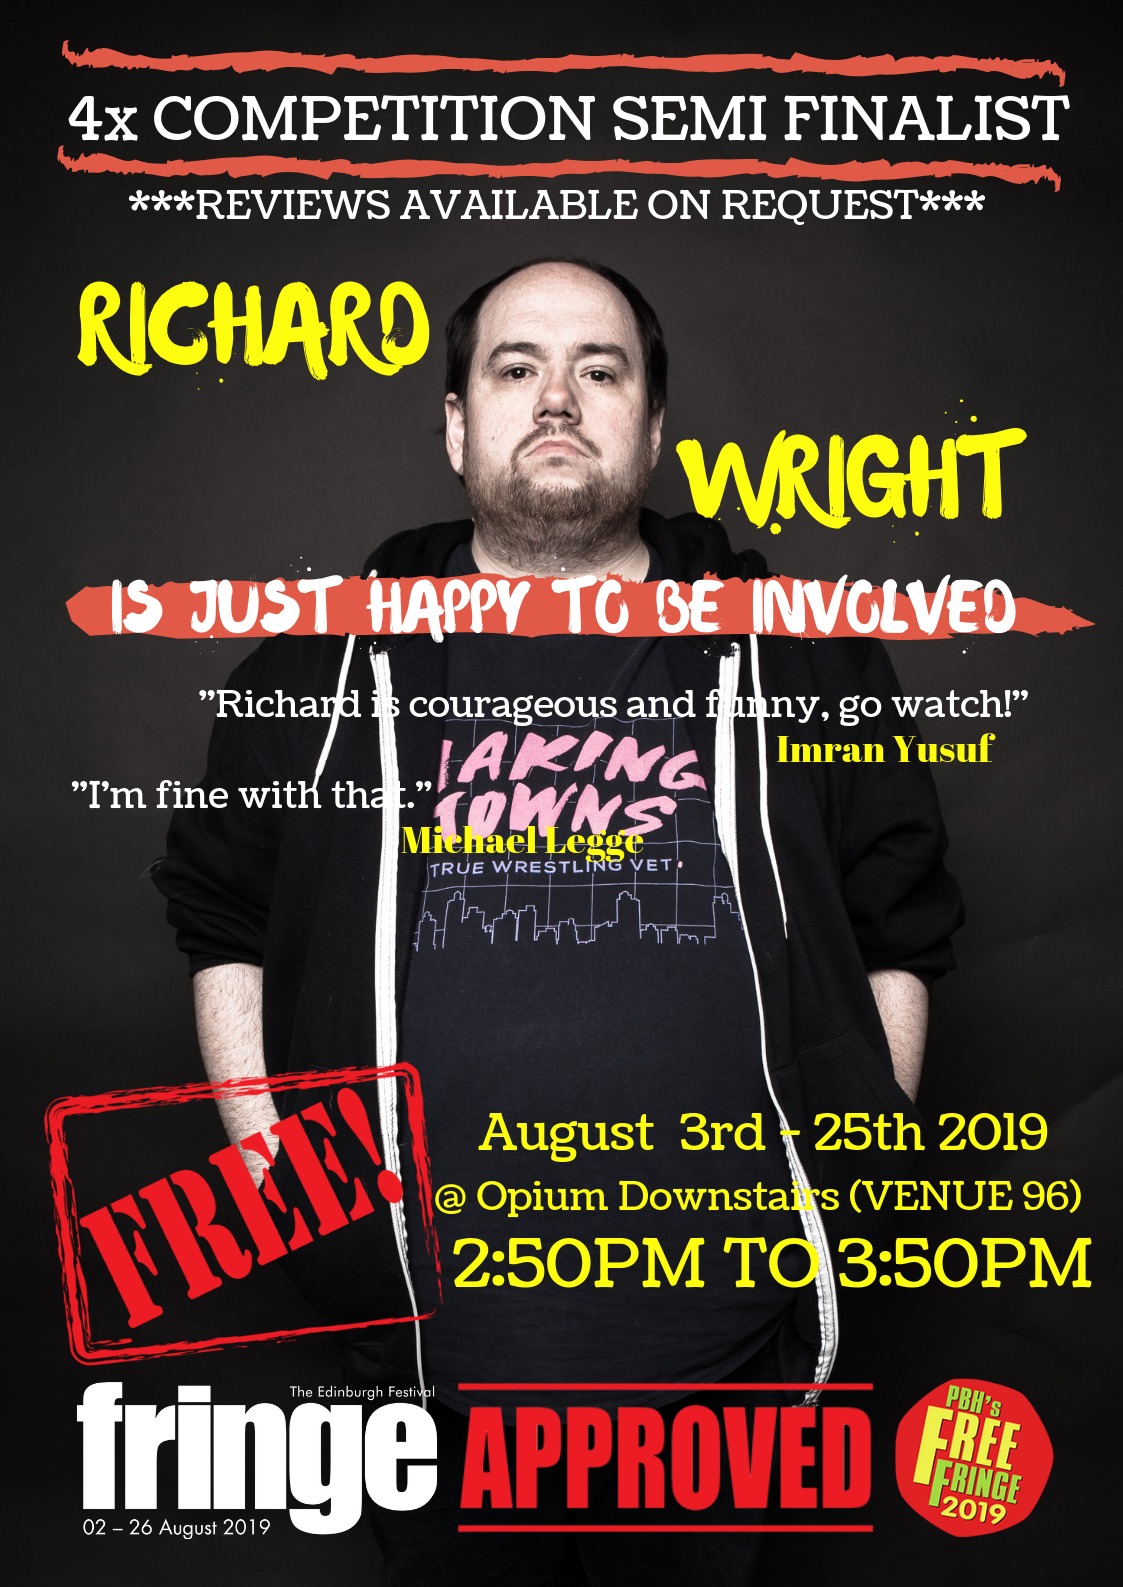 The poster for Richard Wright Is Just Happy To Be Involved